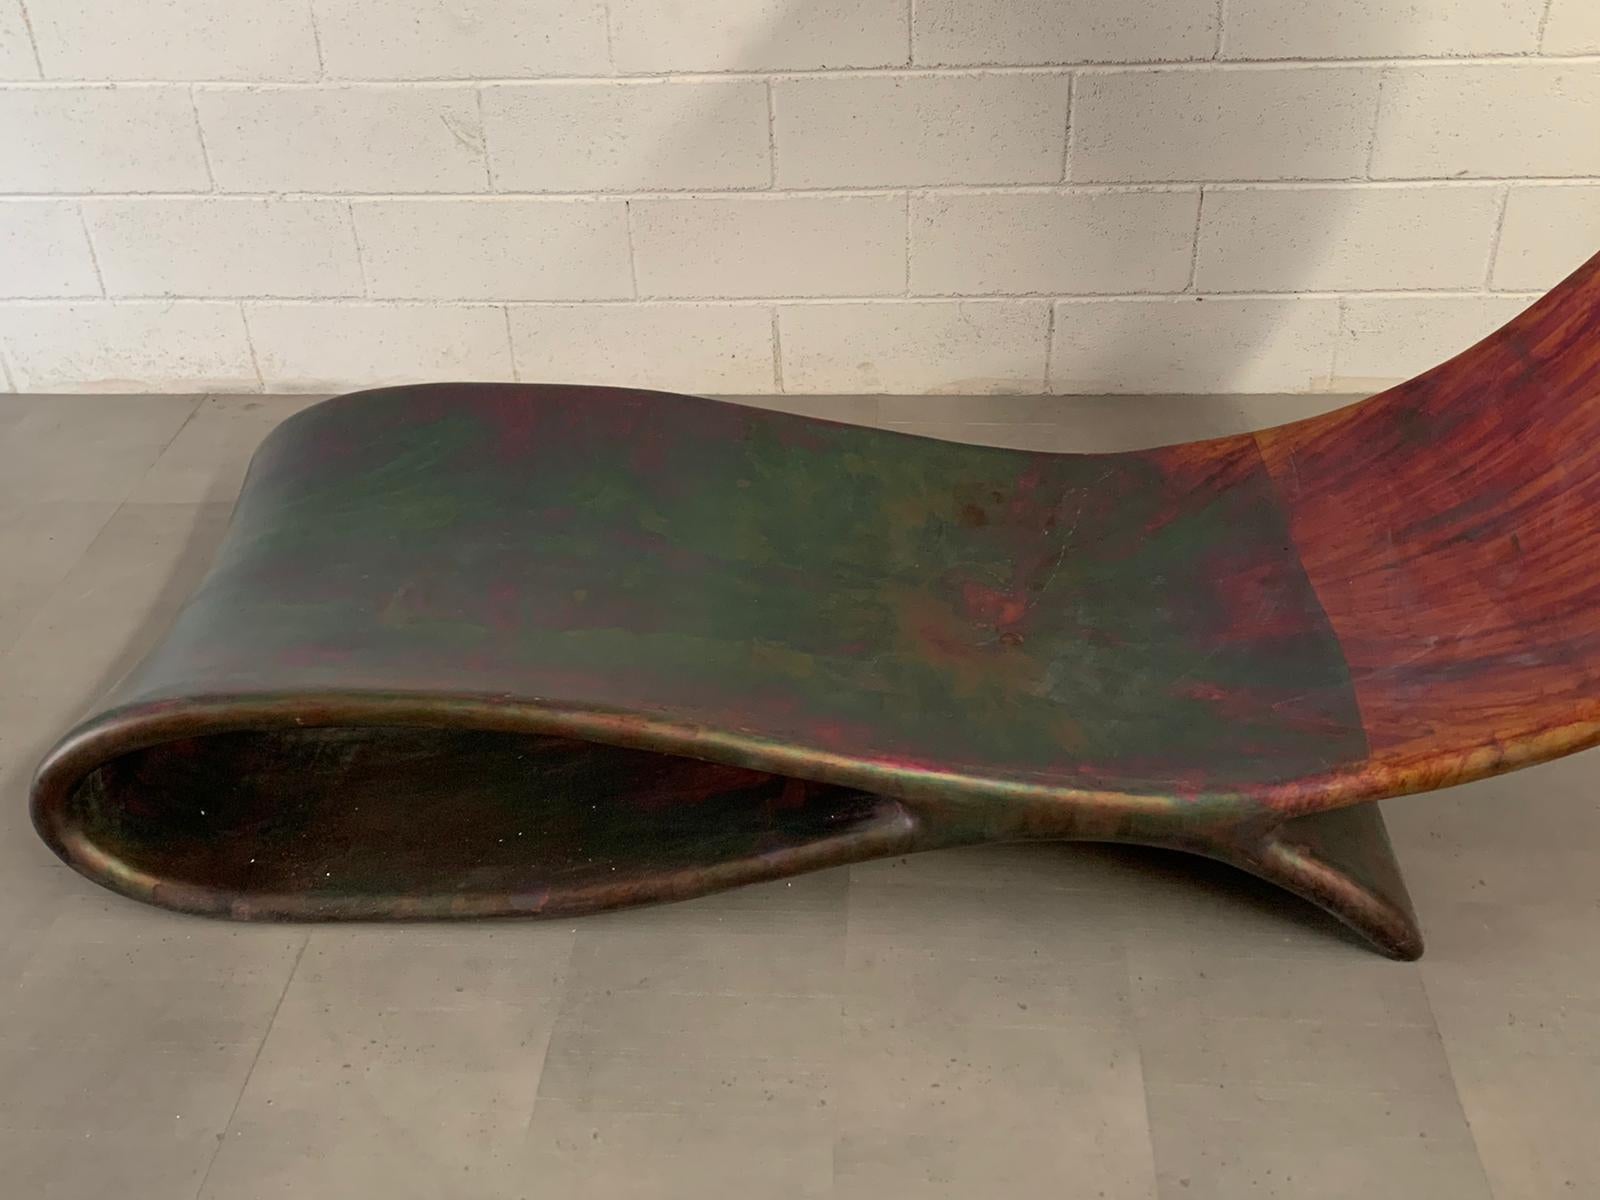 Fiberglass & Copper Chaise Lounge by Ravi Sing for Marco Polo Italia, 1990s For Sale 4